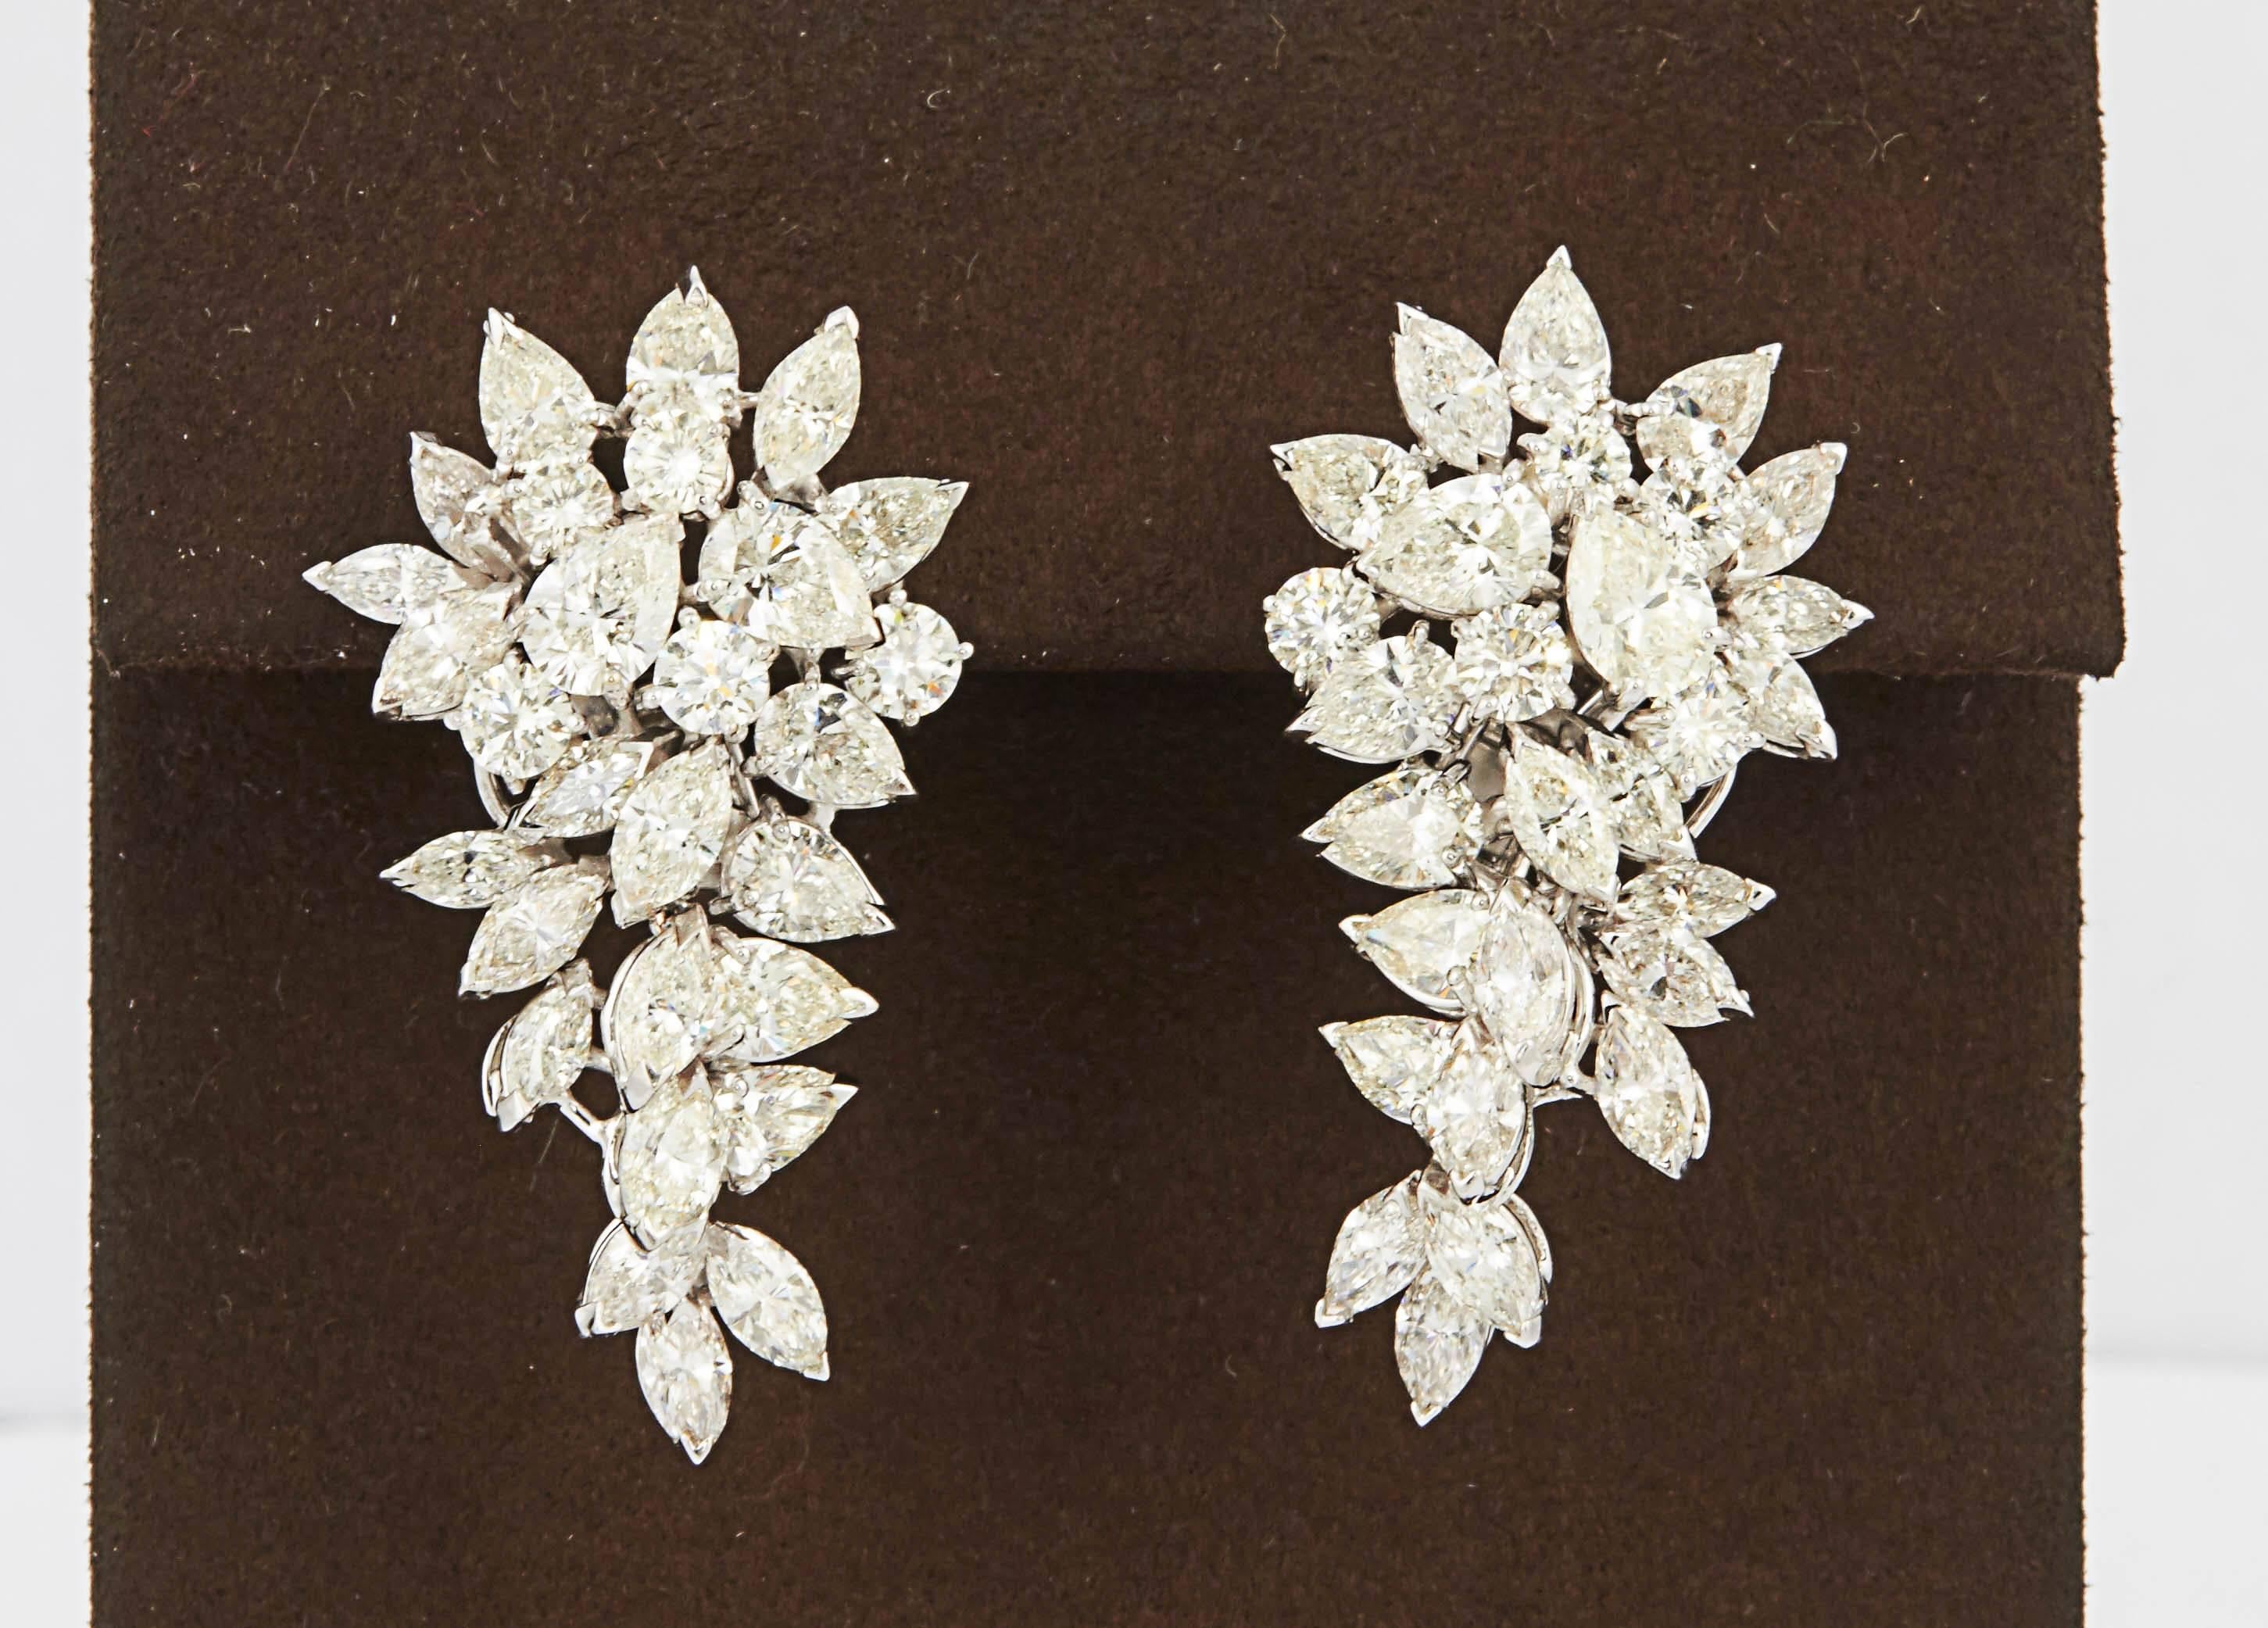 

A substantial cluster earring with beautiful movement. 

18.02 carats of diamonds F/G VS set in 18k white gold. 

Made in Italy, this earring features round, pear and marquise shaped diamonds of various sizes. The diamonds are set at different